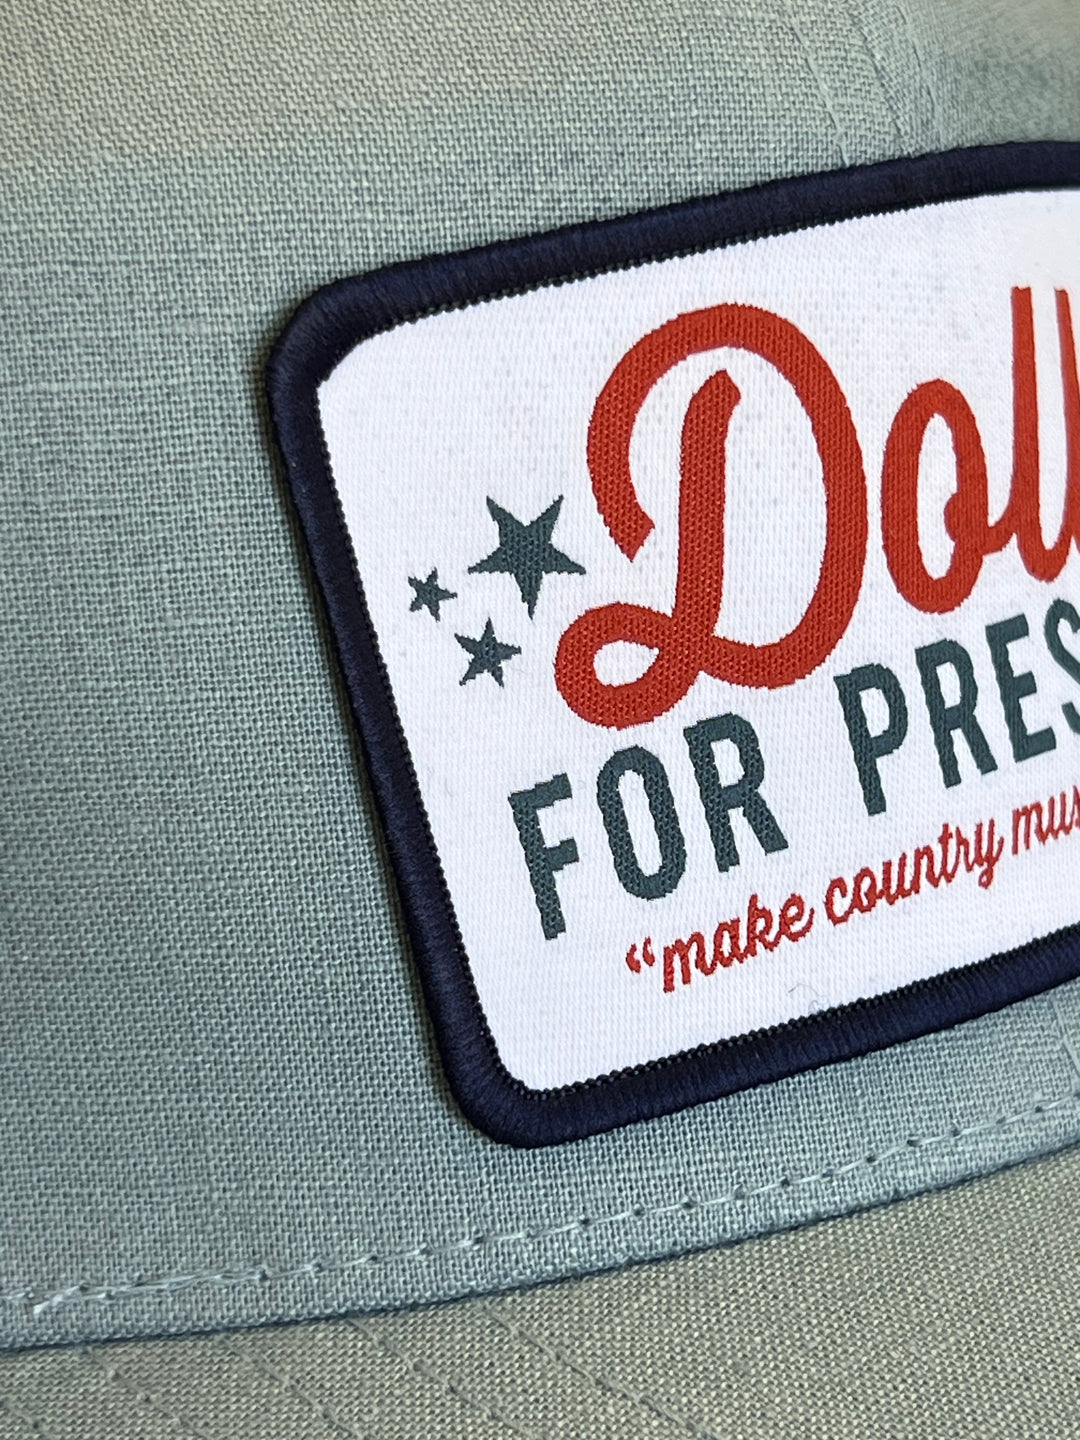 LC&C Dolly For President Hat